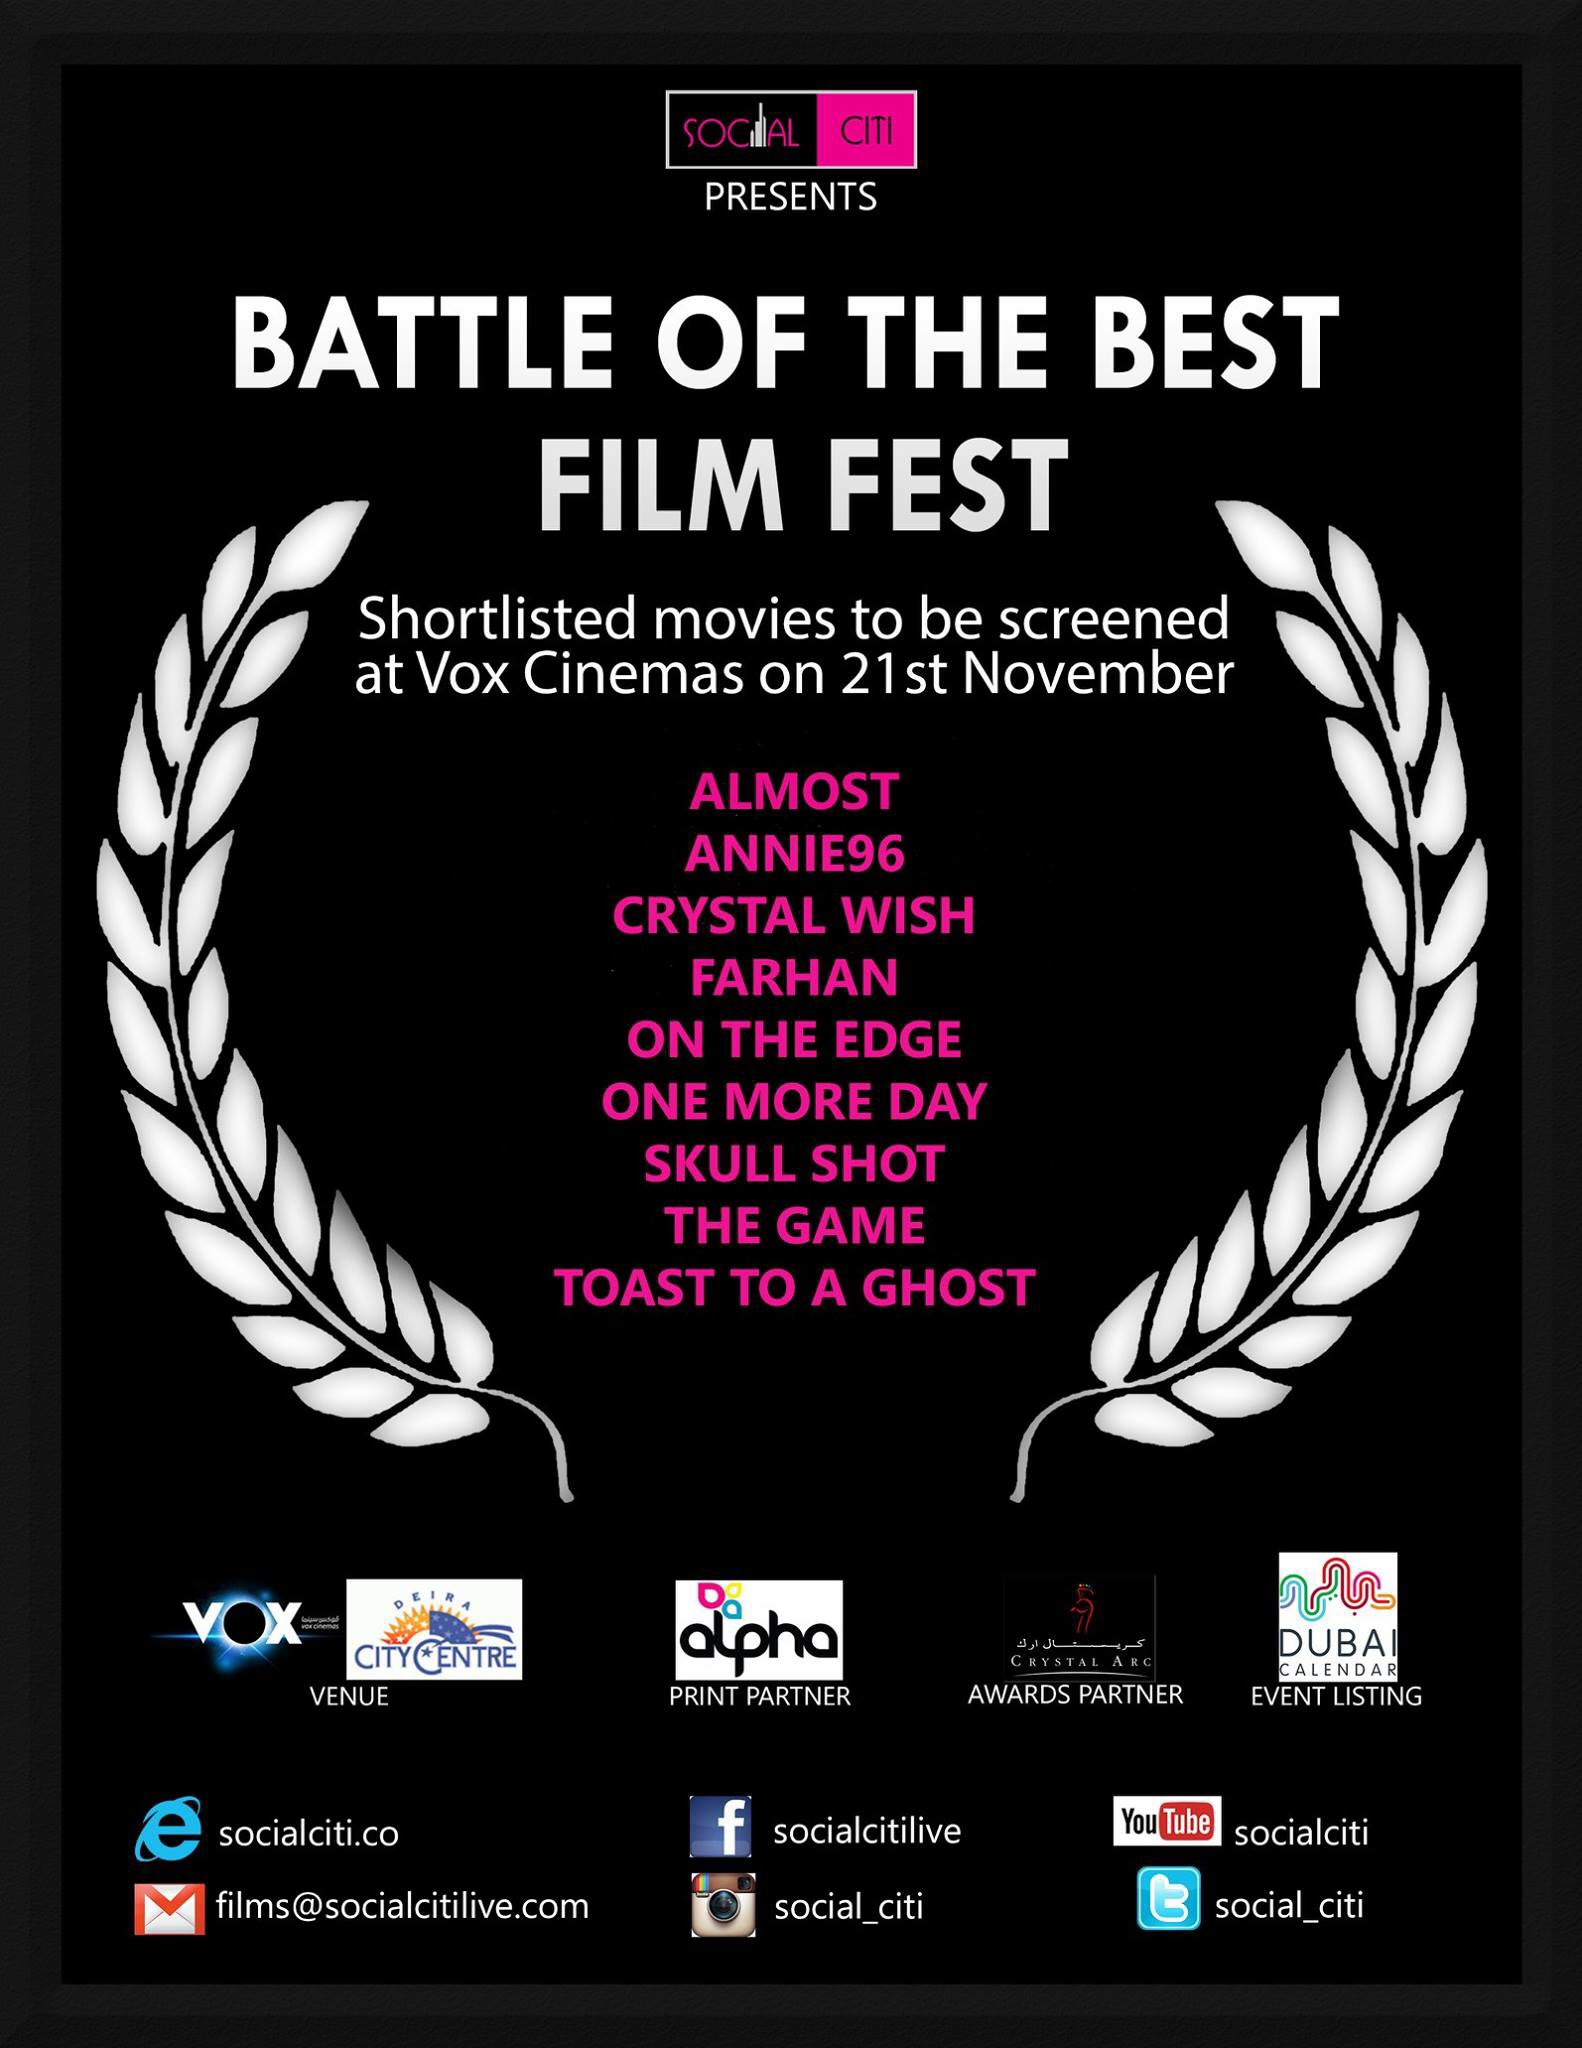 Short film CRYSTAL WISH in Top10 at the Battle Of The Best a Film Fest 2014 in Dubai, UAE